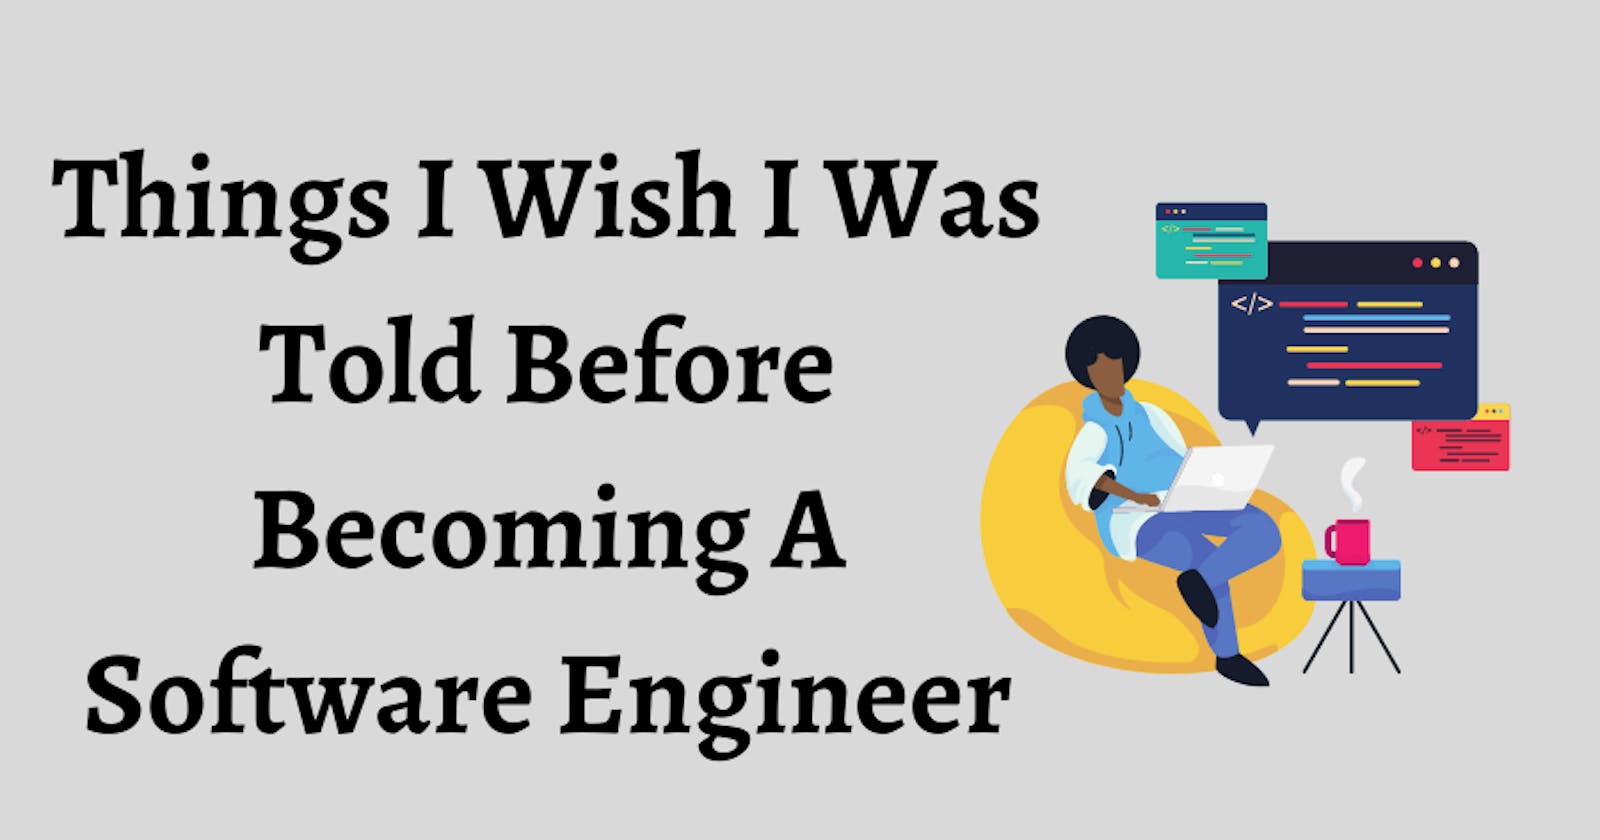 Things I Wish I Was Told Before Becoming A Software Engineer